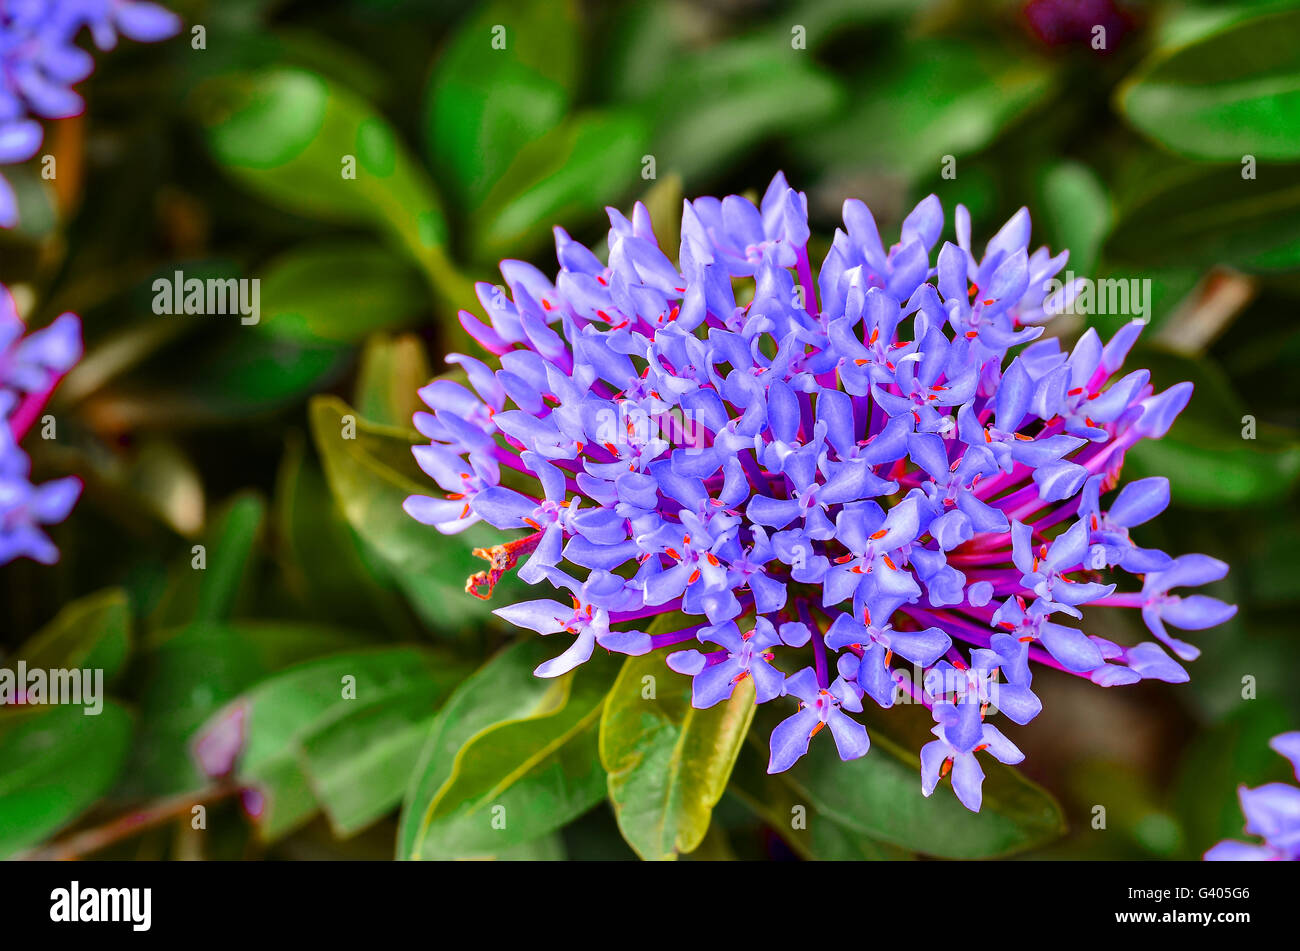 Violet spike flower blooming on tree Stock Photo